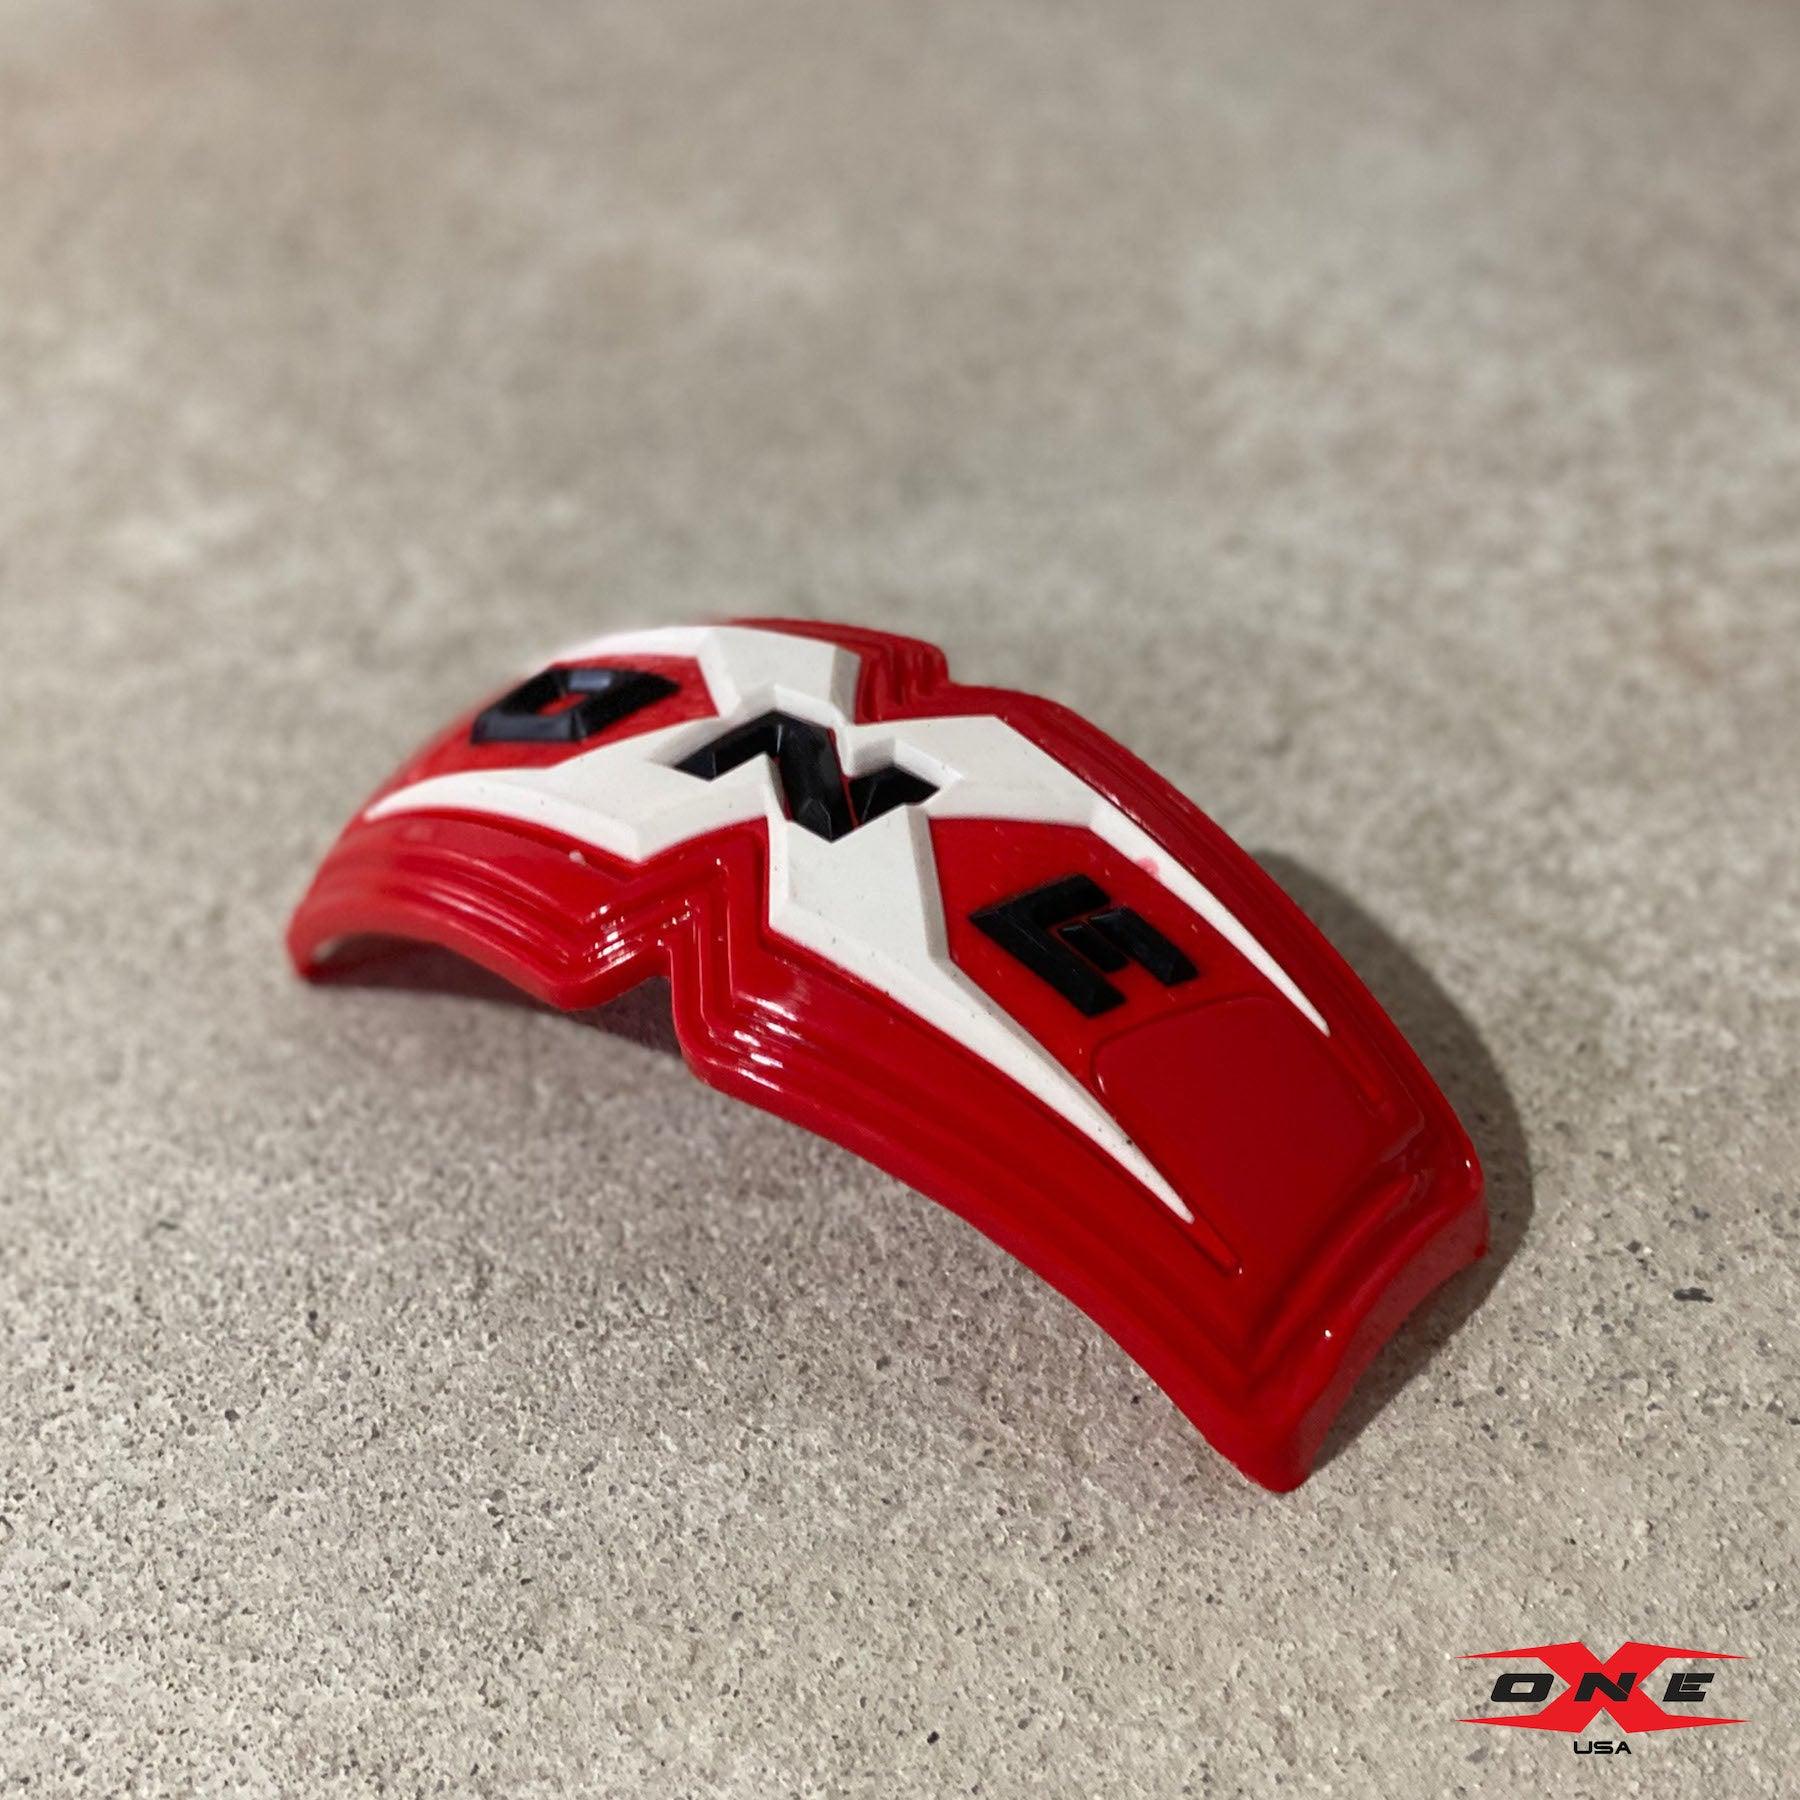 OneX USA RACE SUIT REPLACEMENT SHOULDER GUARD - RED - OneX USA